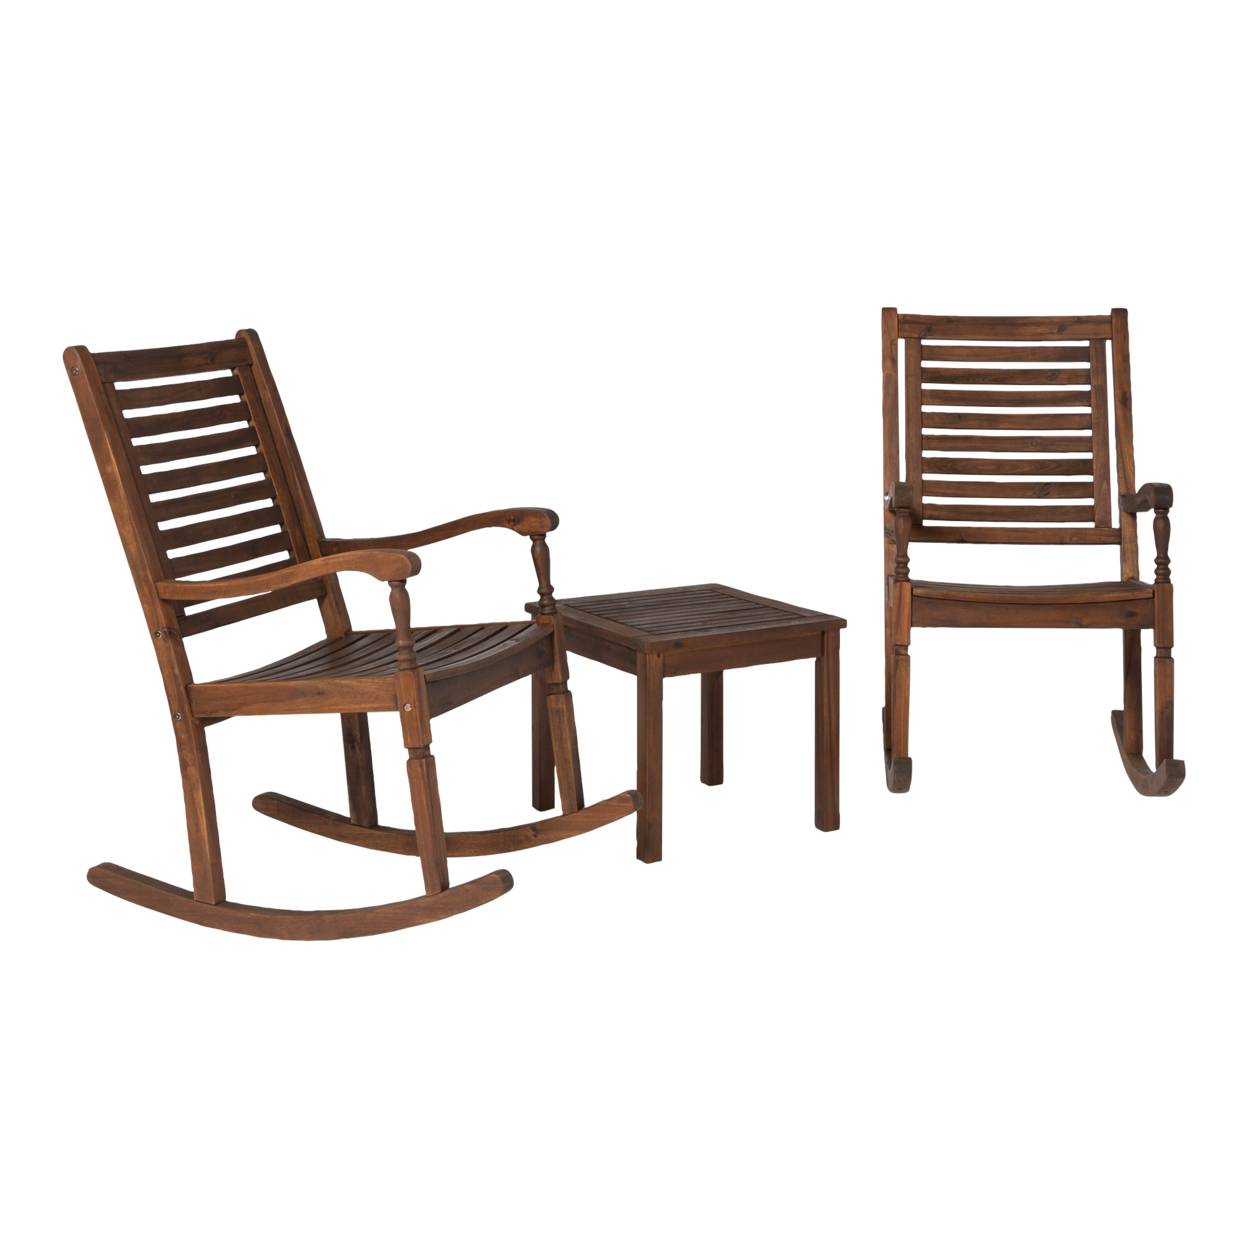 3-Piece Traditional Rocking Chair Outdoor Chat Set with Slatted Square Side Table - Dark Brown - image 2 of 2